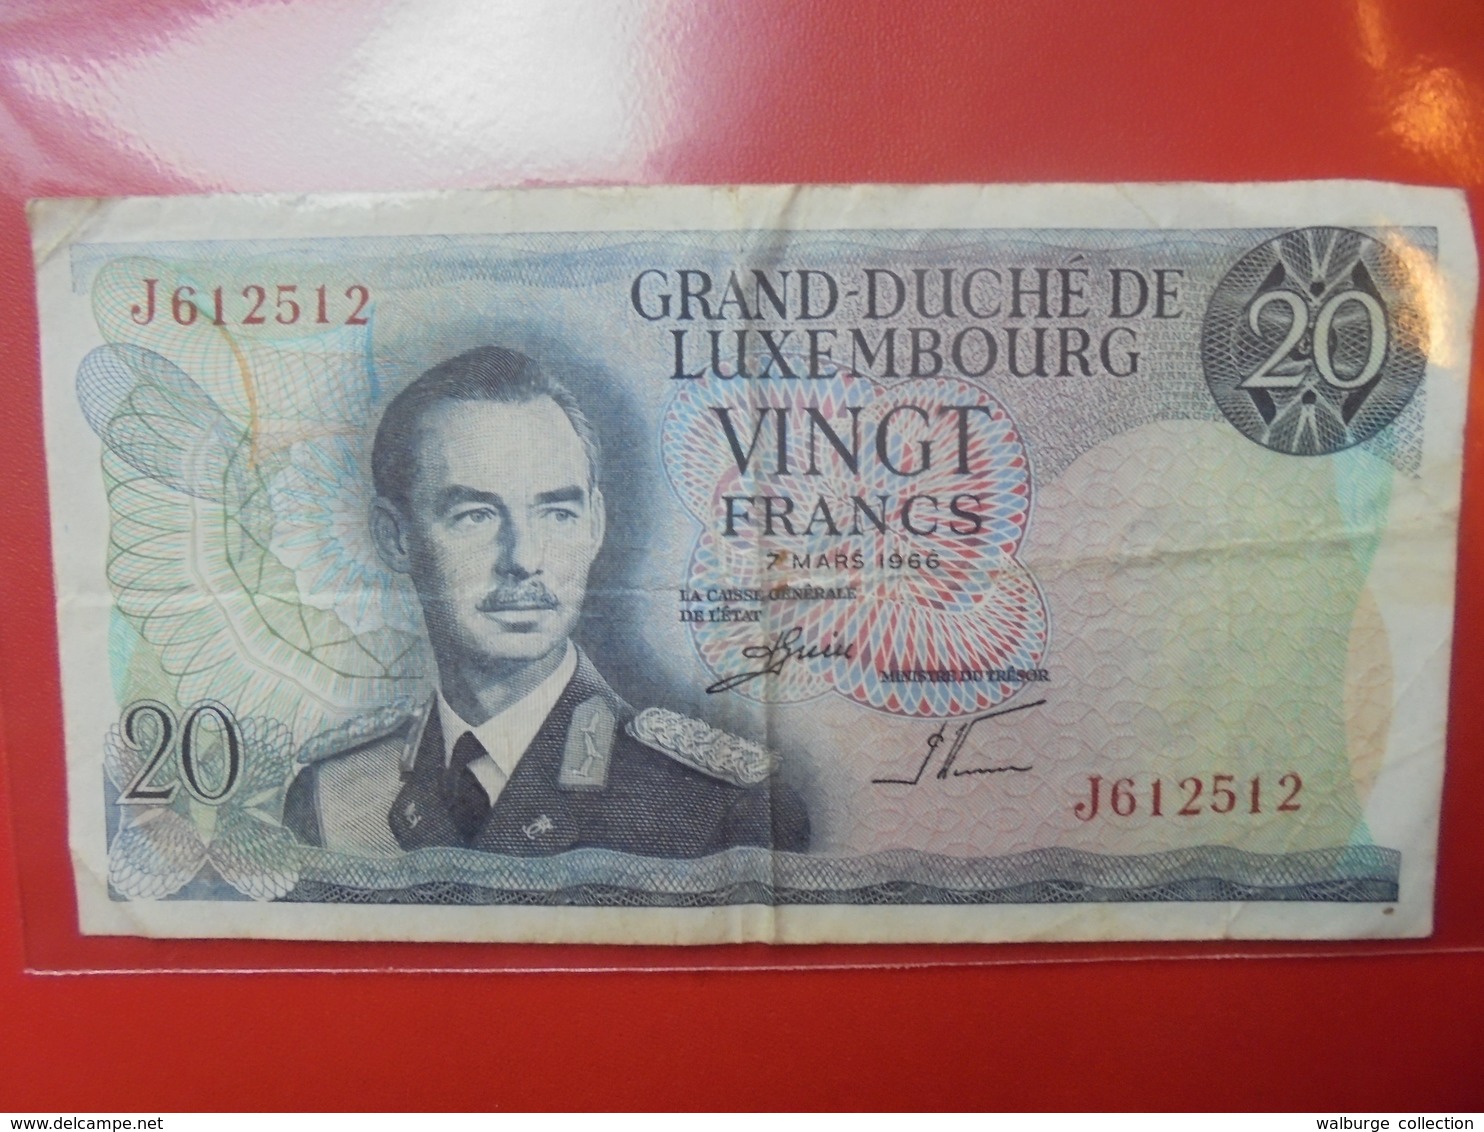 LUXEMBOURG 20 FRANCS 1966 CIRCULER - Luxembourg